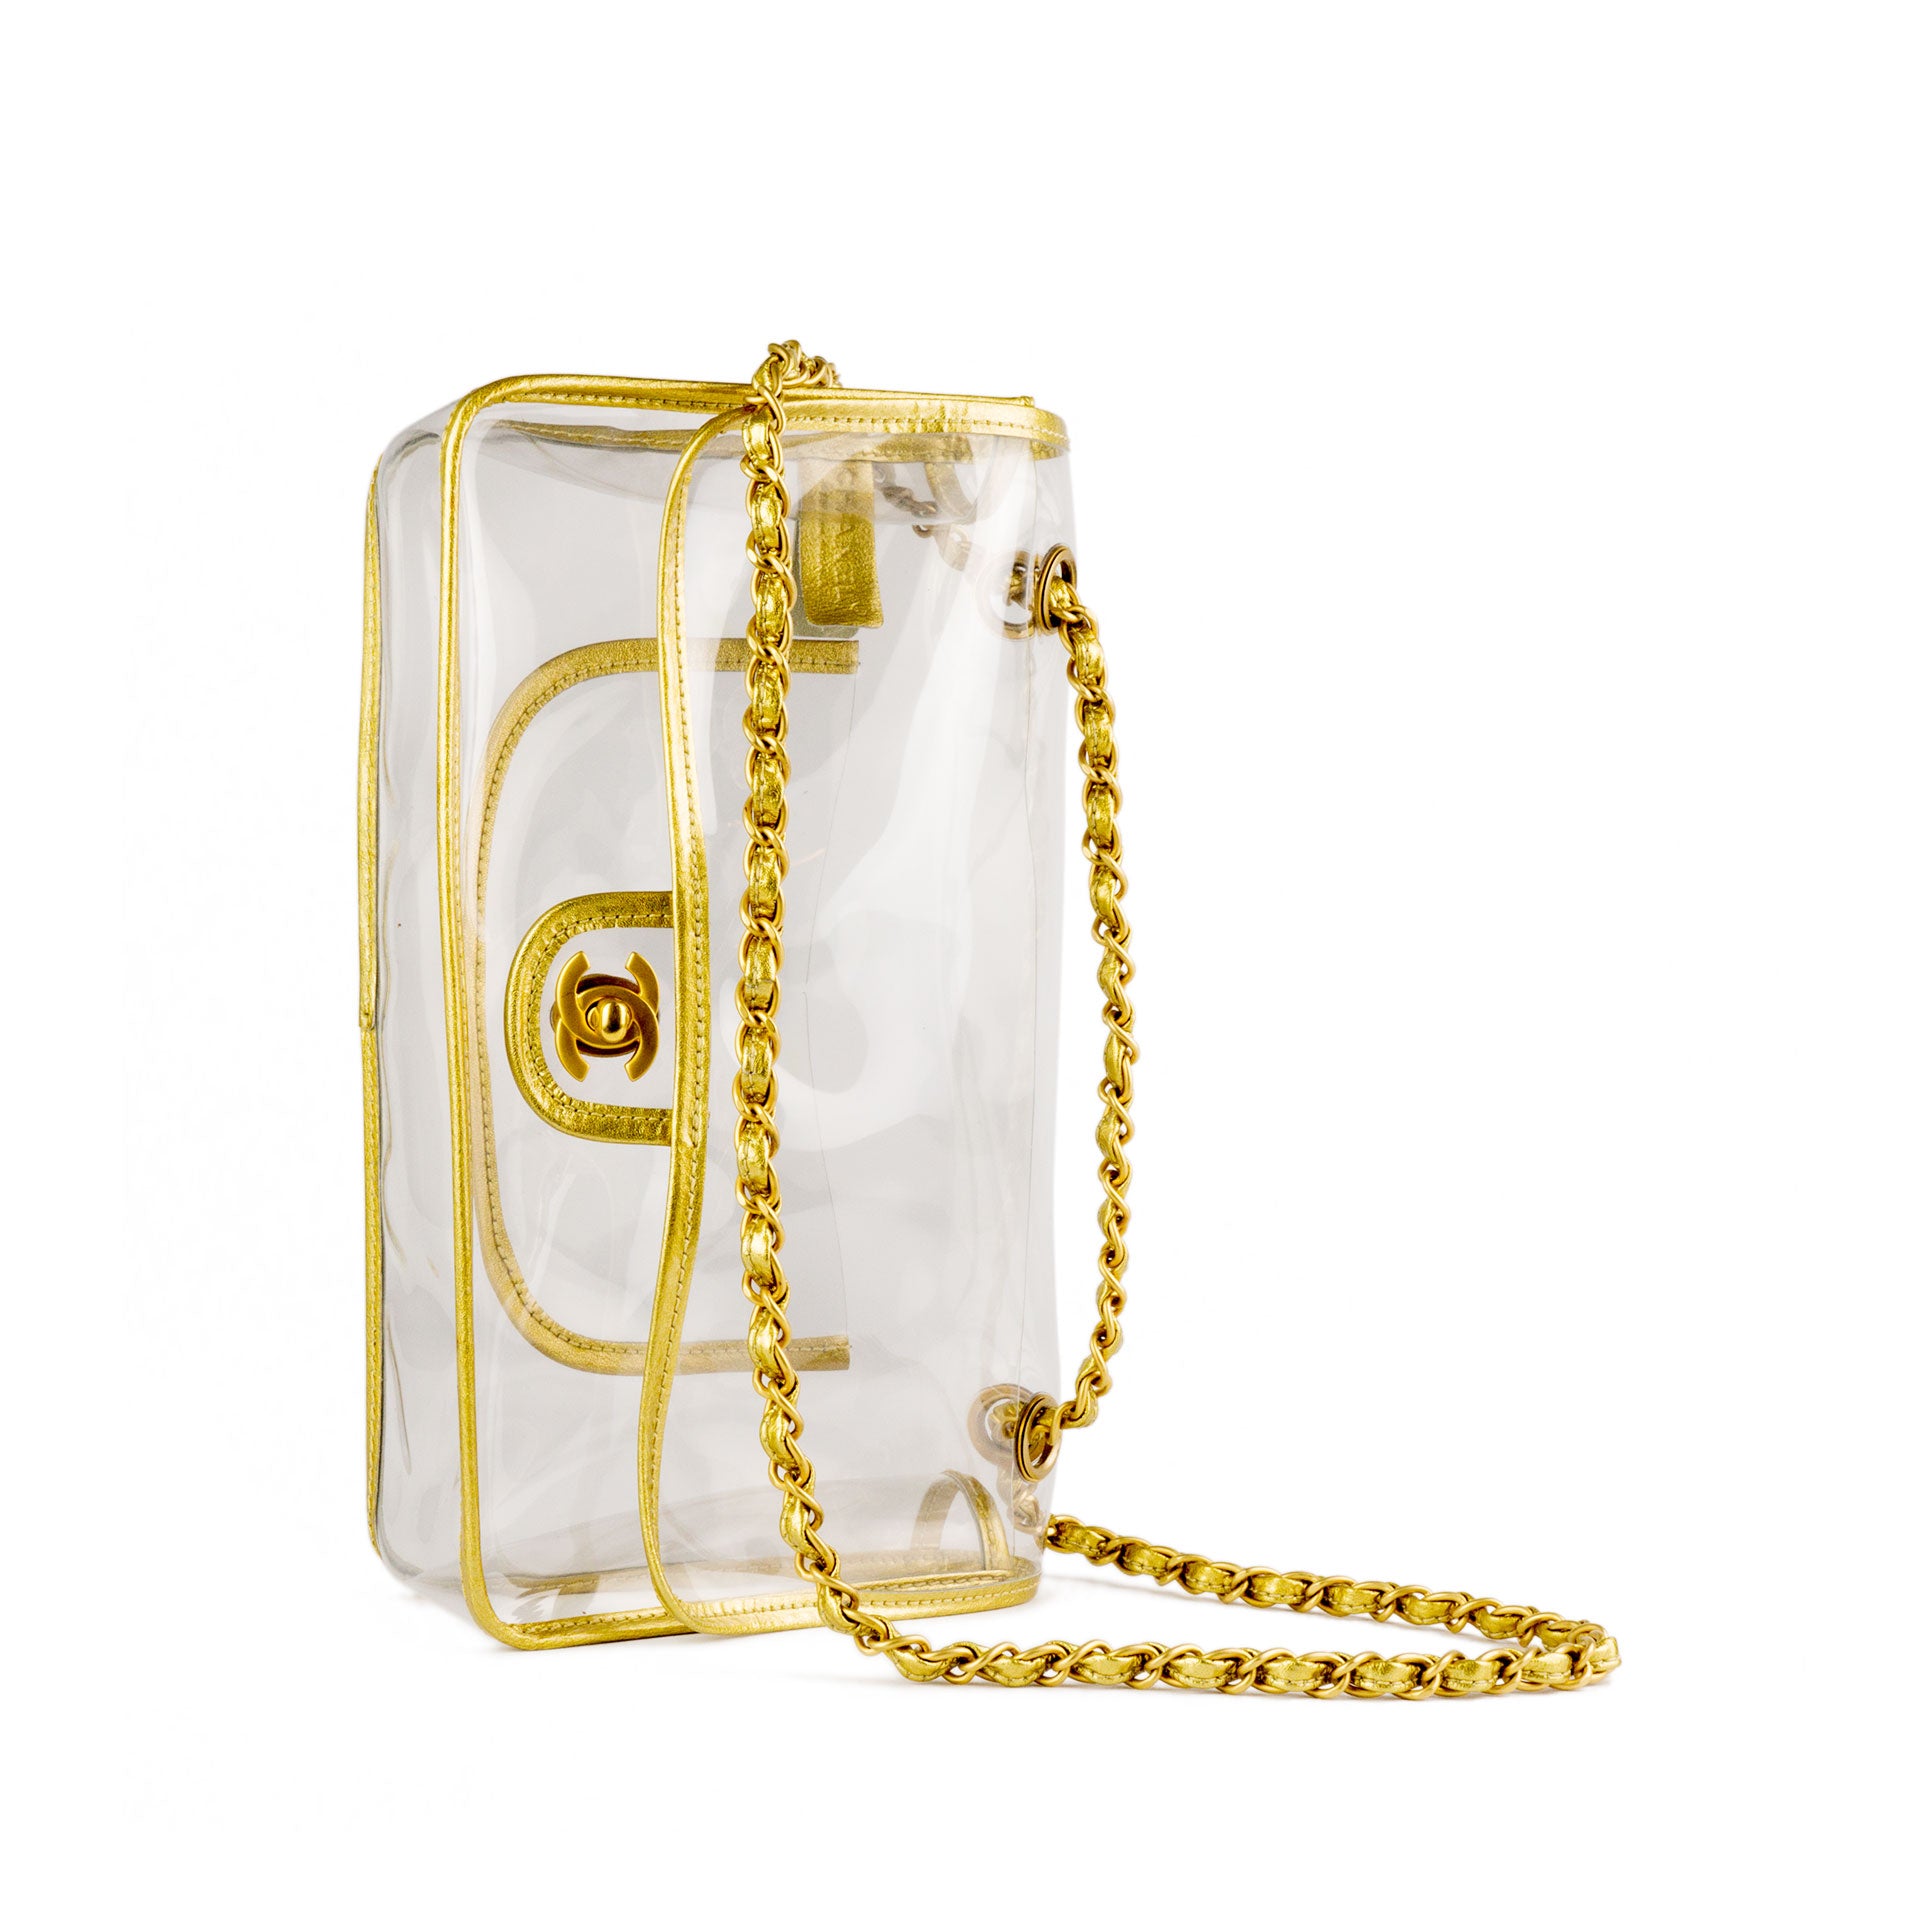 Chanel Clear Bag - 46 For Sale on 1stDibs